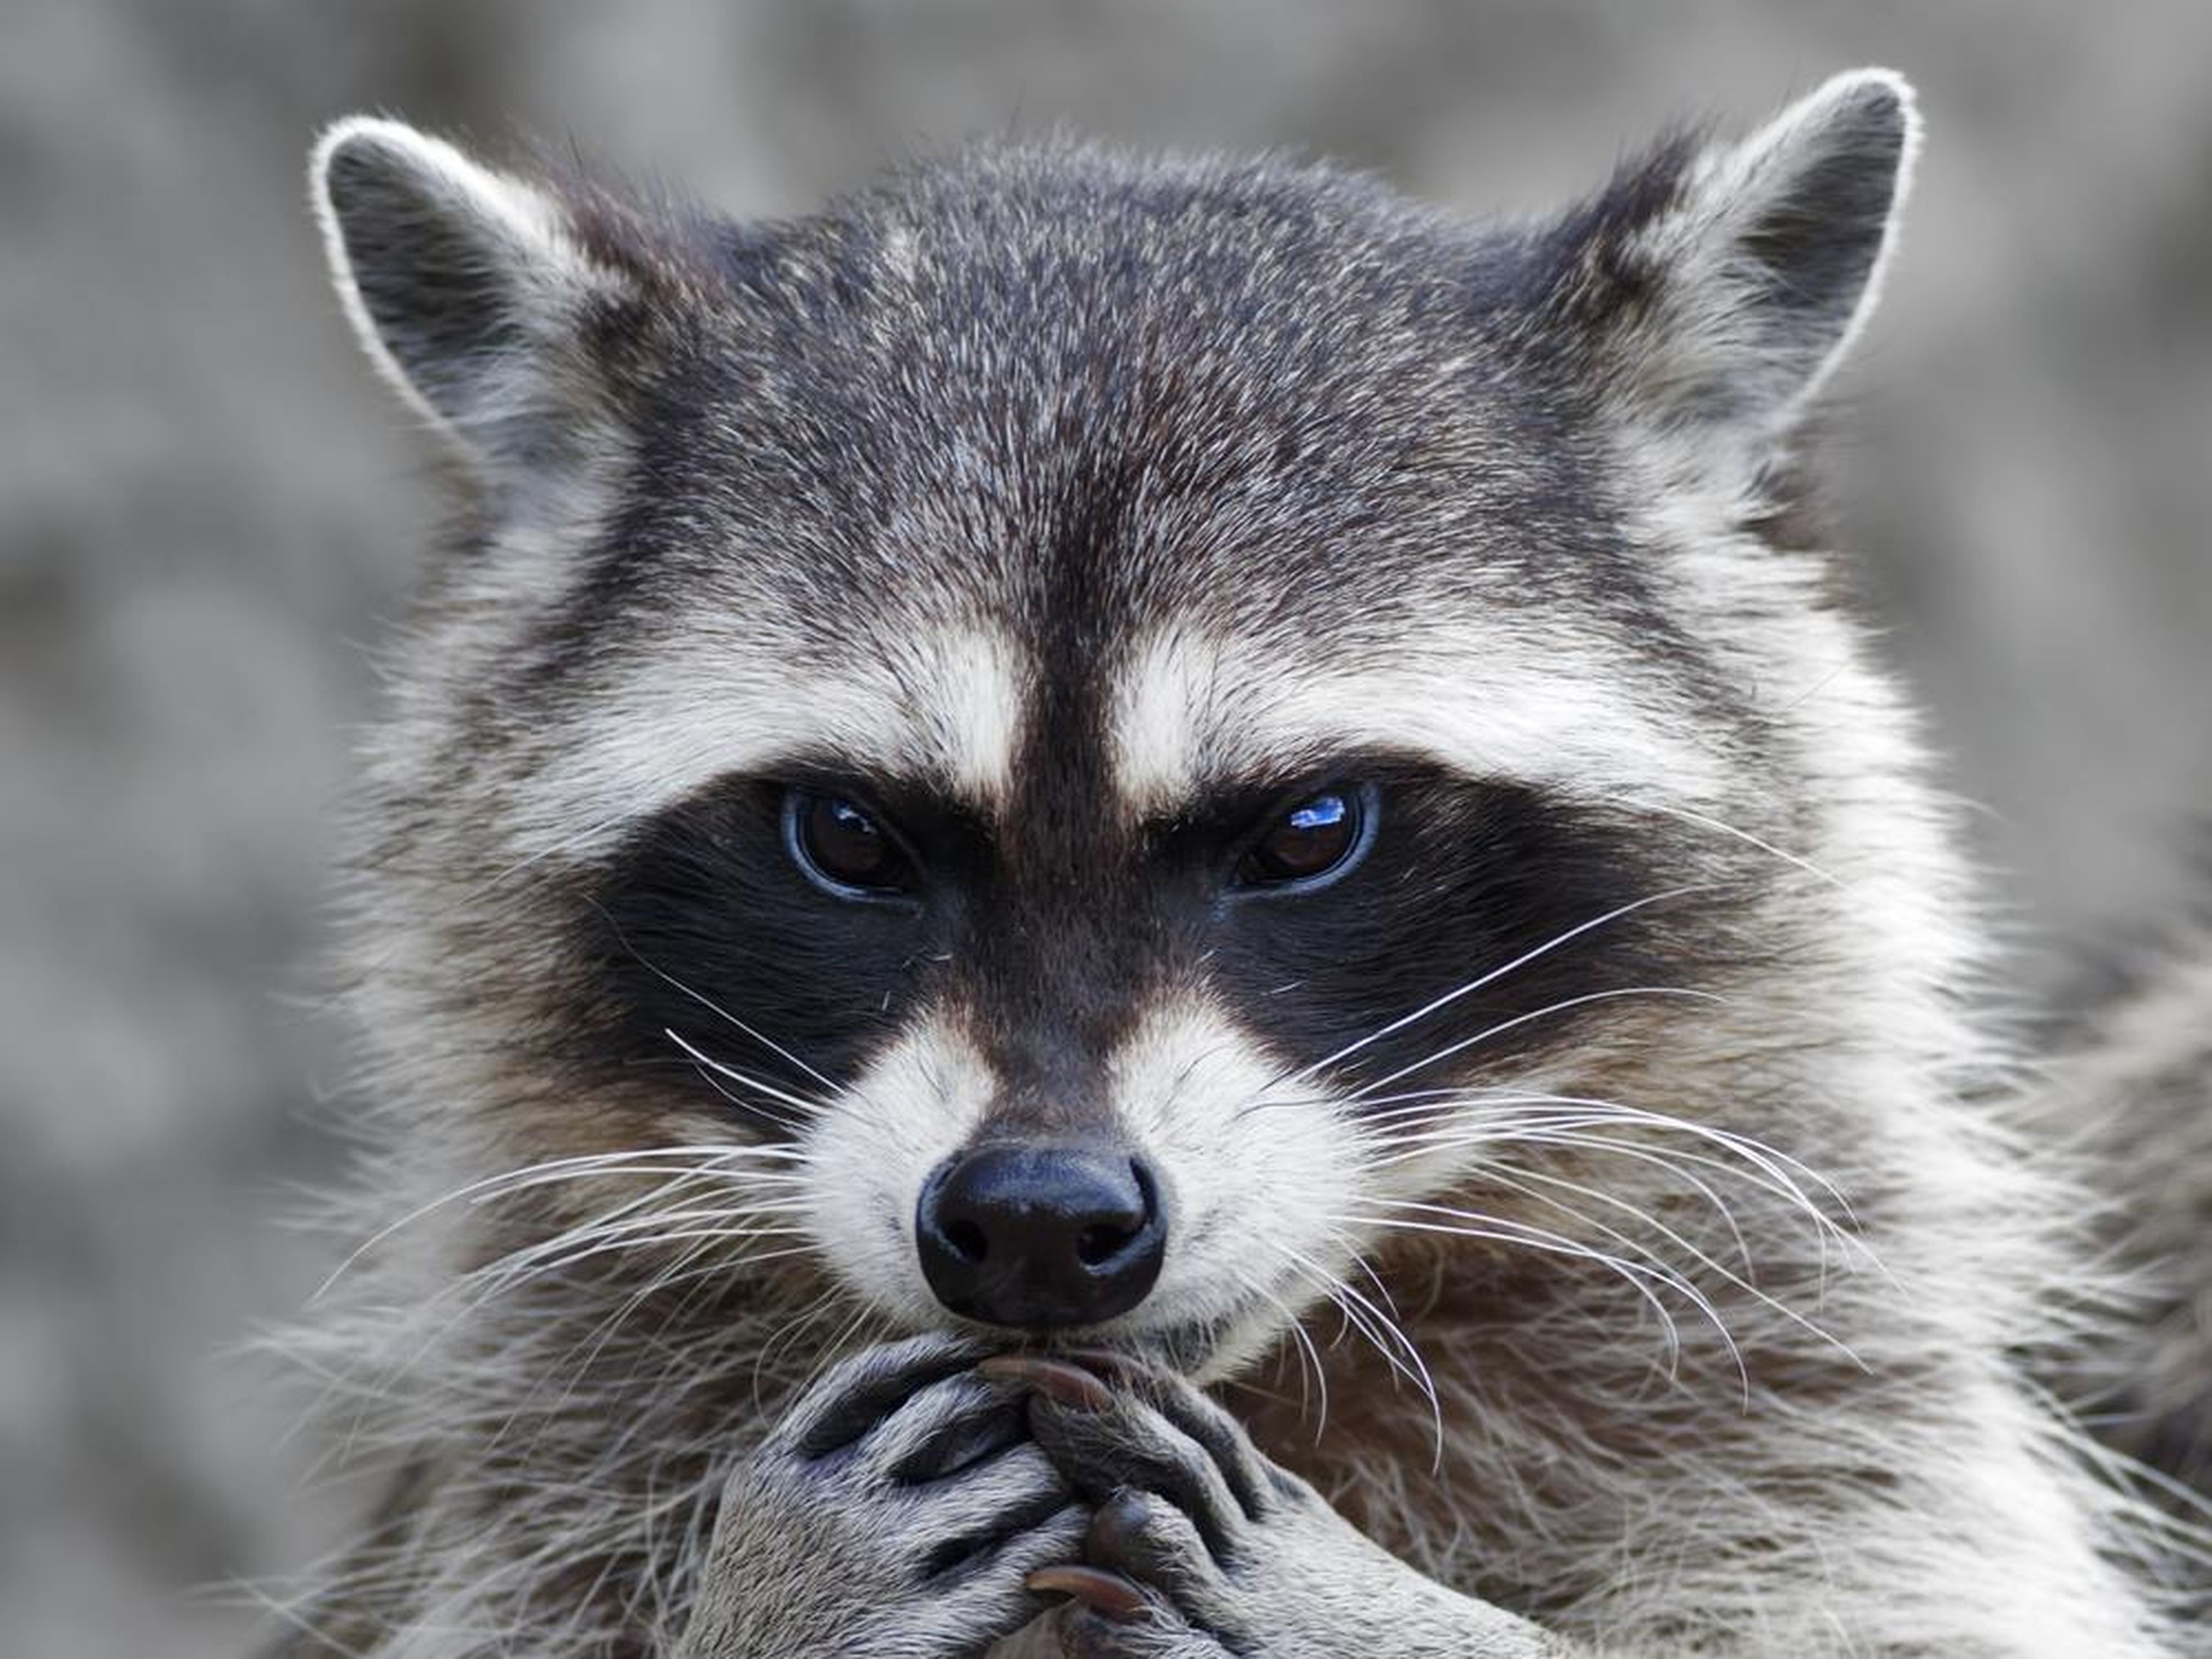 Raccoons can carry the rabies virus.